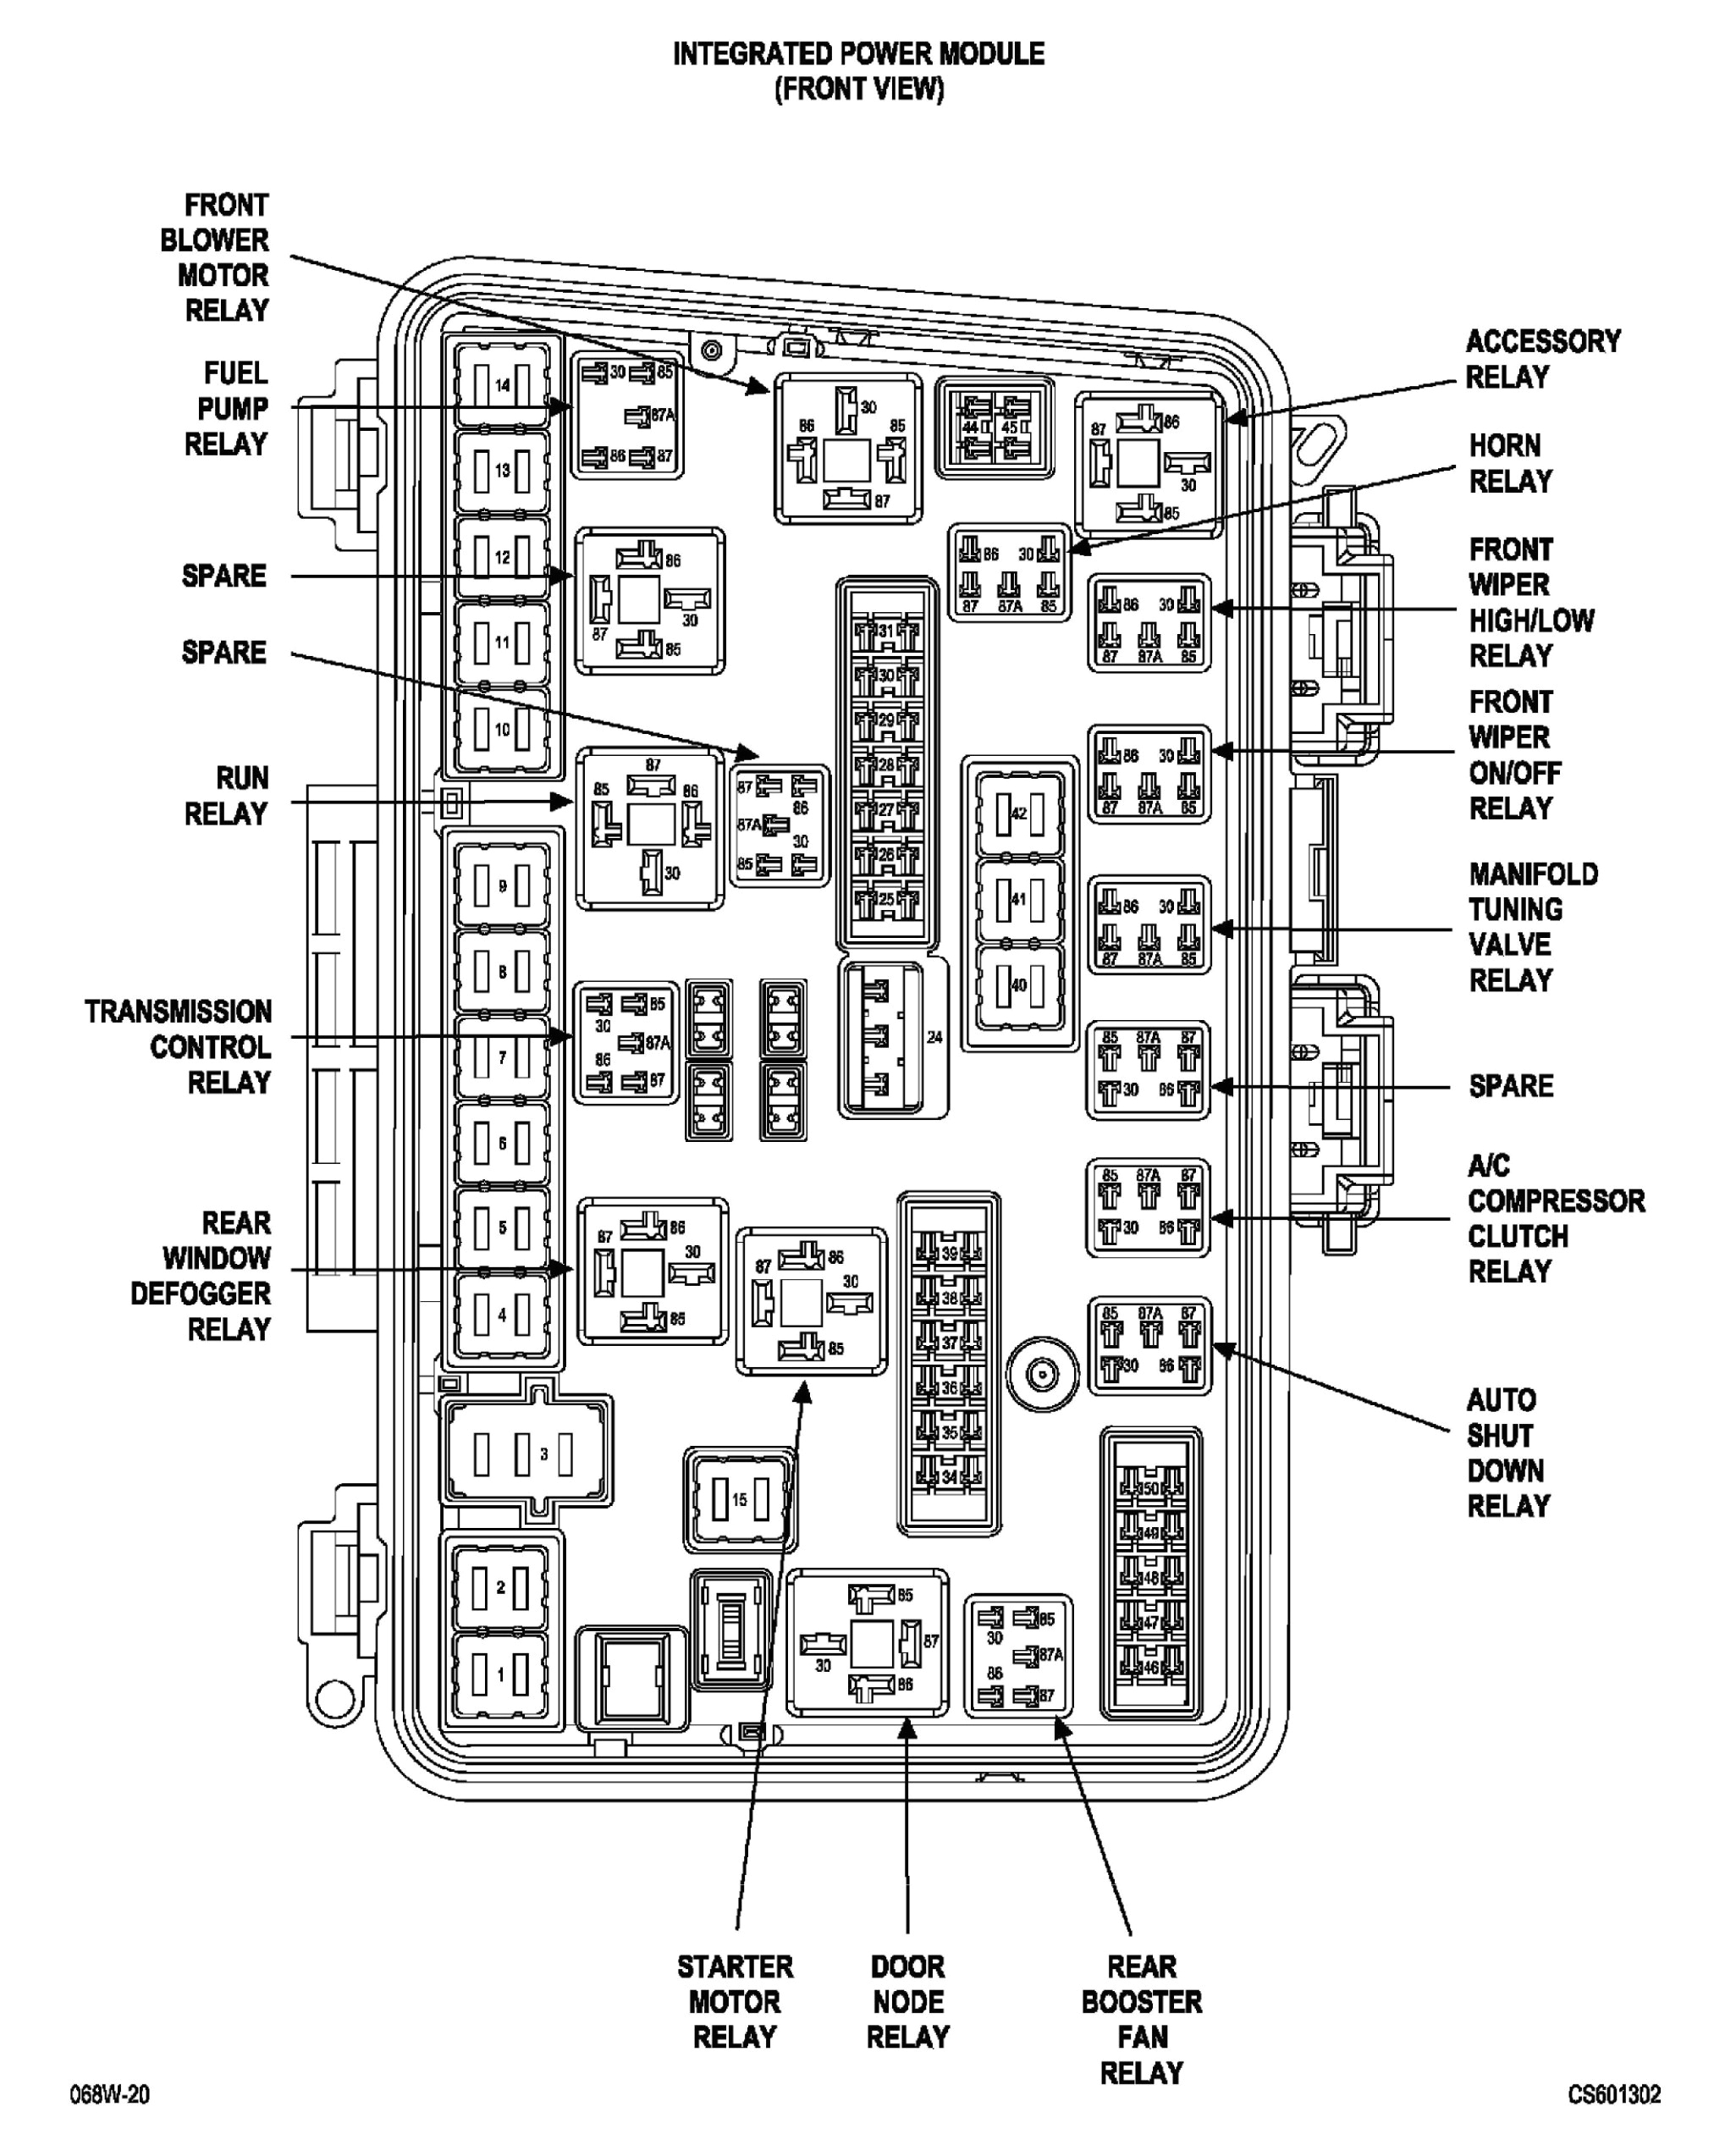 04 pacifica fuse box database wiring diagramchrysler pacifica fuse box diagram wiring diagram database 2004 pacifica